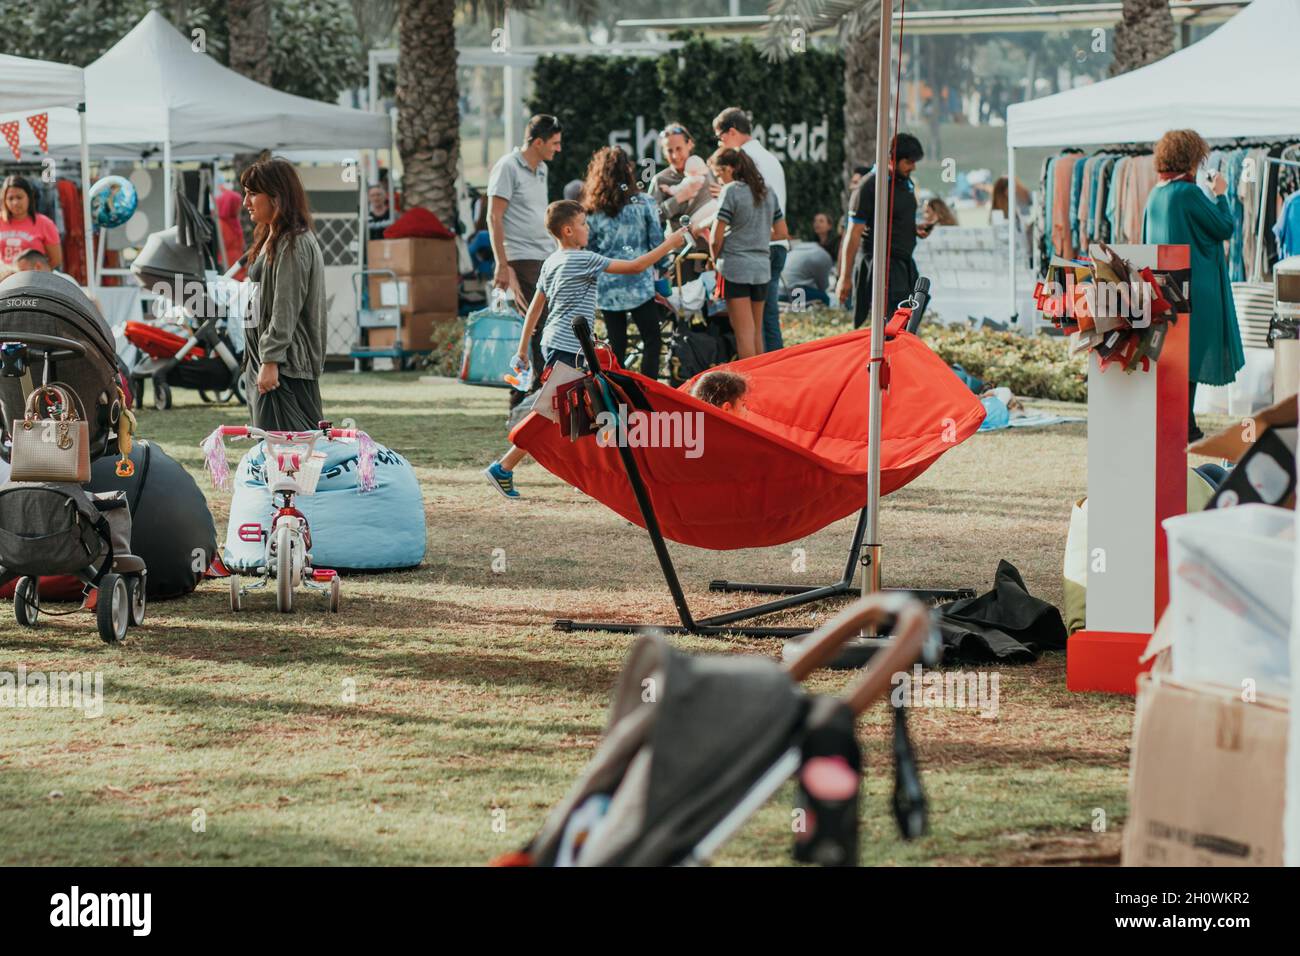 People walking at the park. Kids play and adults go around in the fair with green grass, palms, emerald trees, interesting flag decoration. Stock Photo